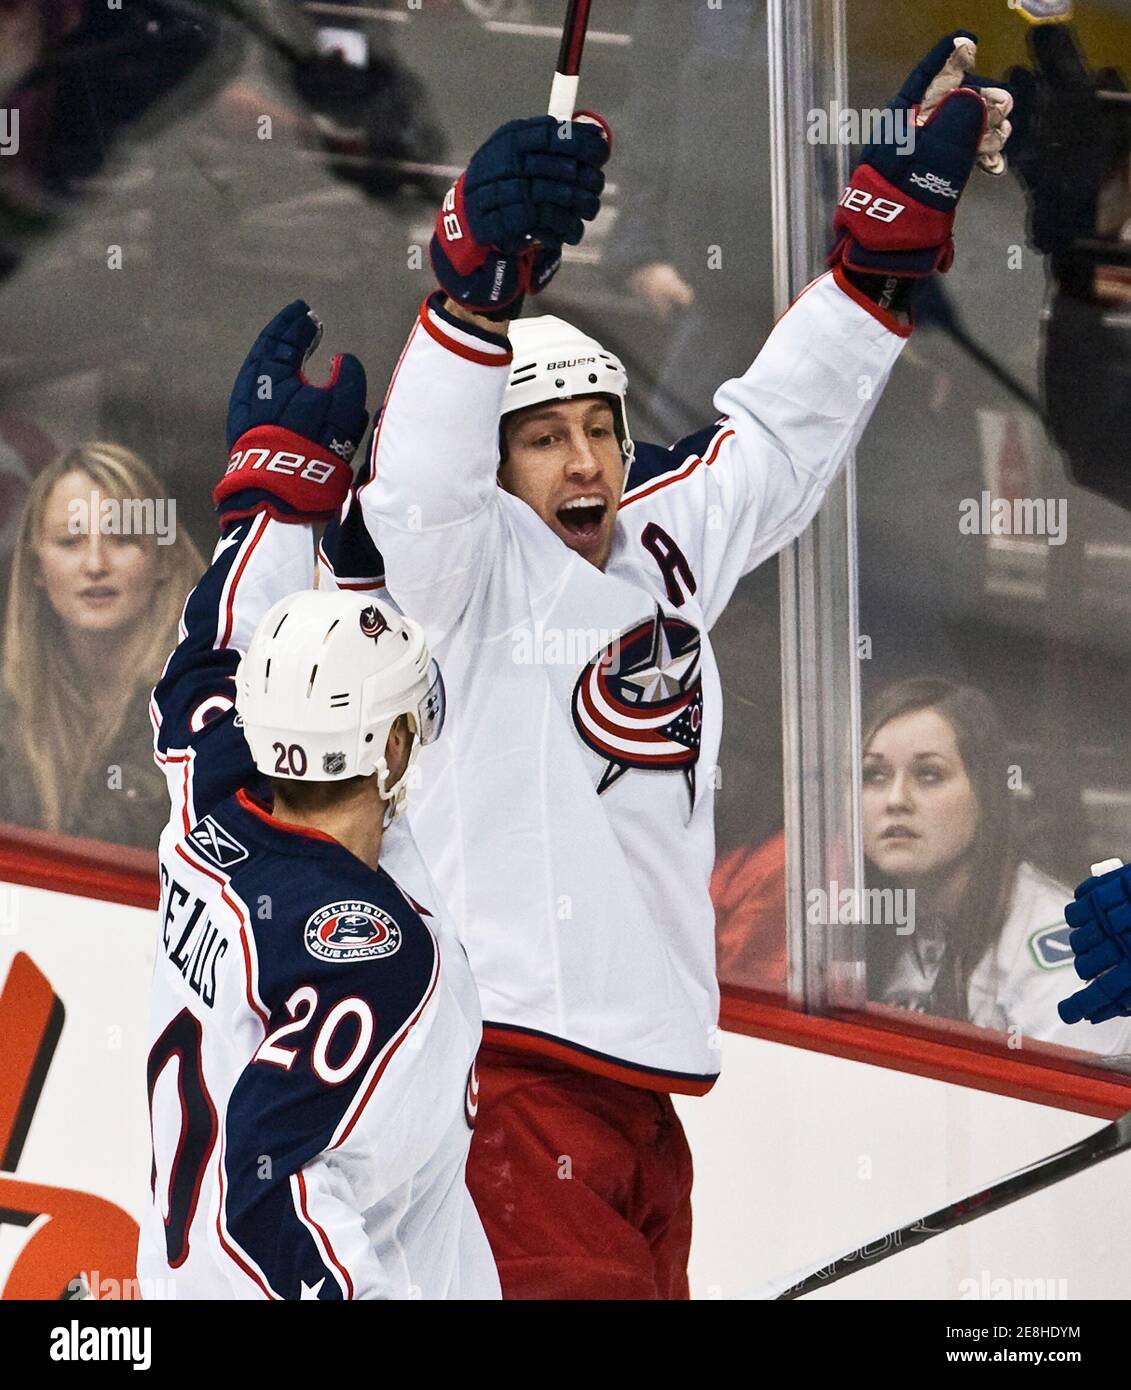 Columbus Blue Jackets RJ Umberger celebrates his goal with team mate Kristian Huselius against the Vancouver Canucks during first period NHL hockey action in Vancouver, British Columbia, January 5, 2010.          REUTERS/Andy Clark     (CANADA - Tags: SPORT ICE HOCKEY) Stock Photo